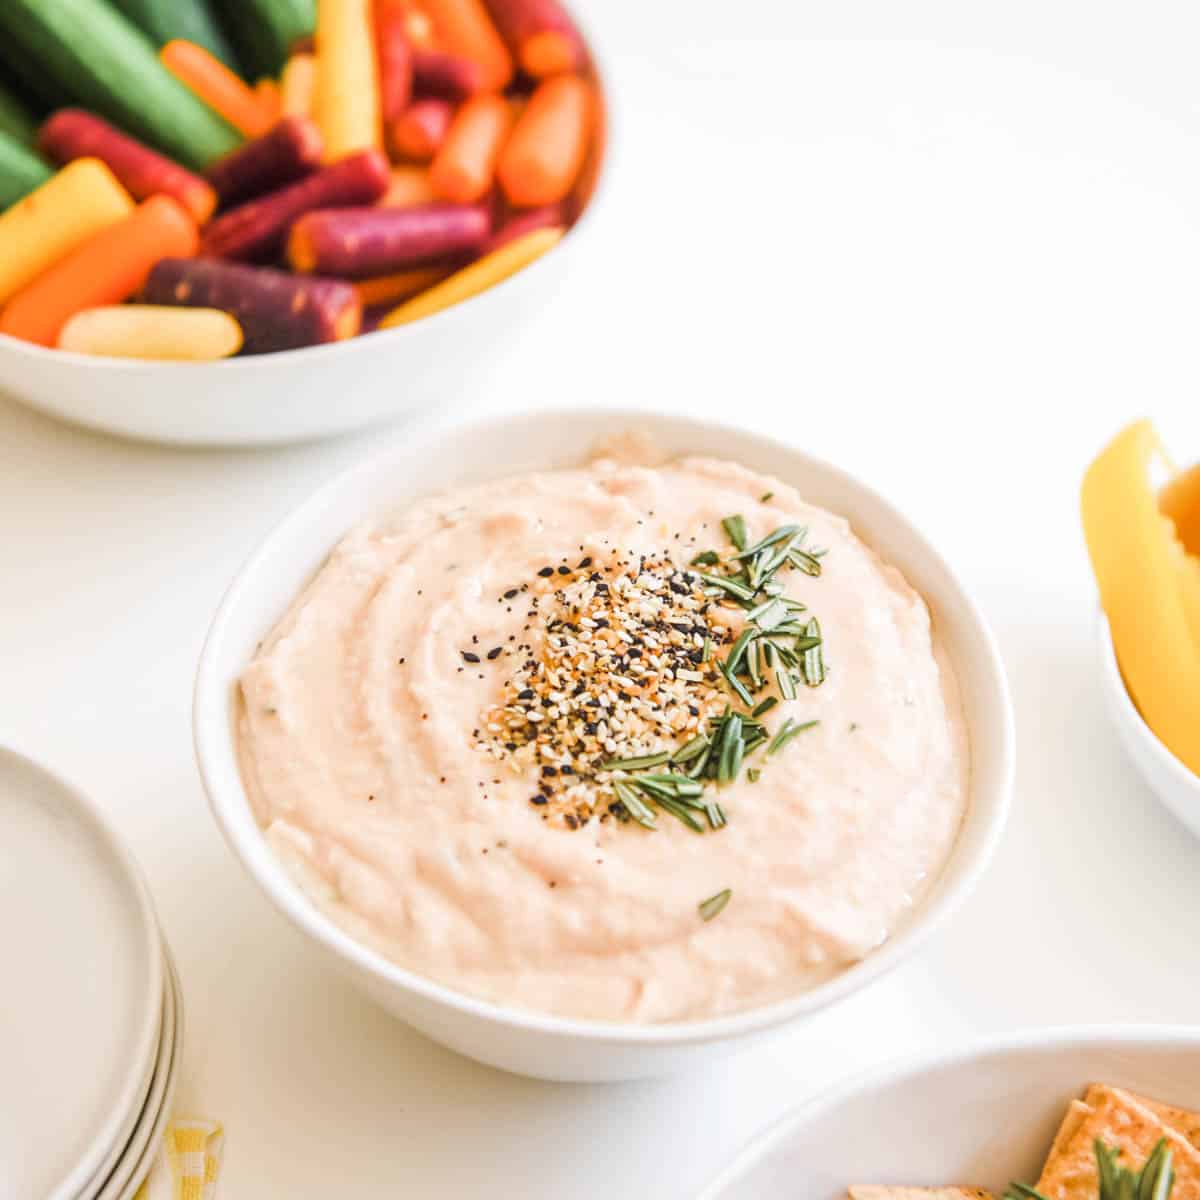 White bean dip in a white bowl on a table next to vegetables.